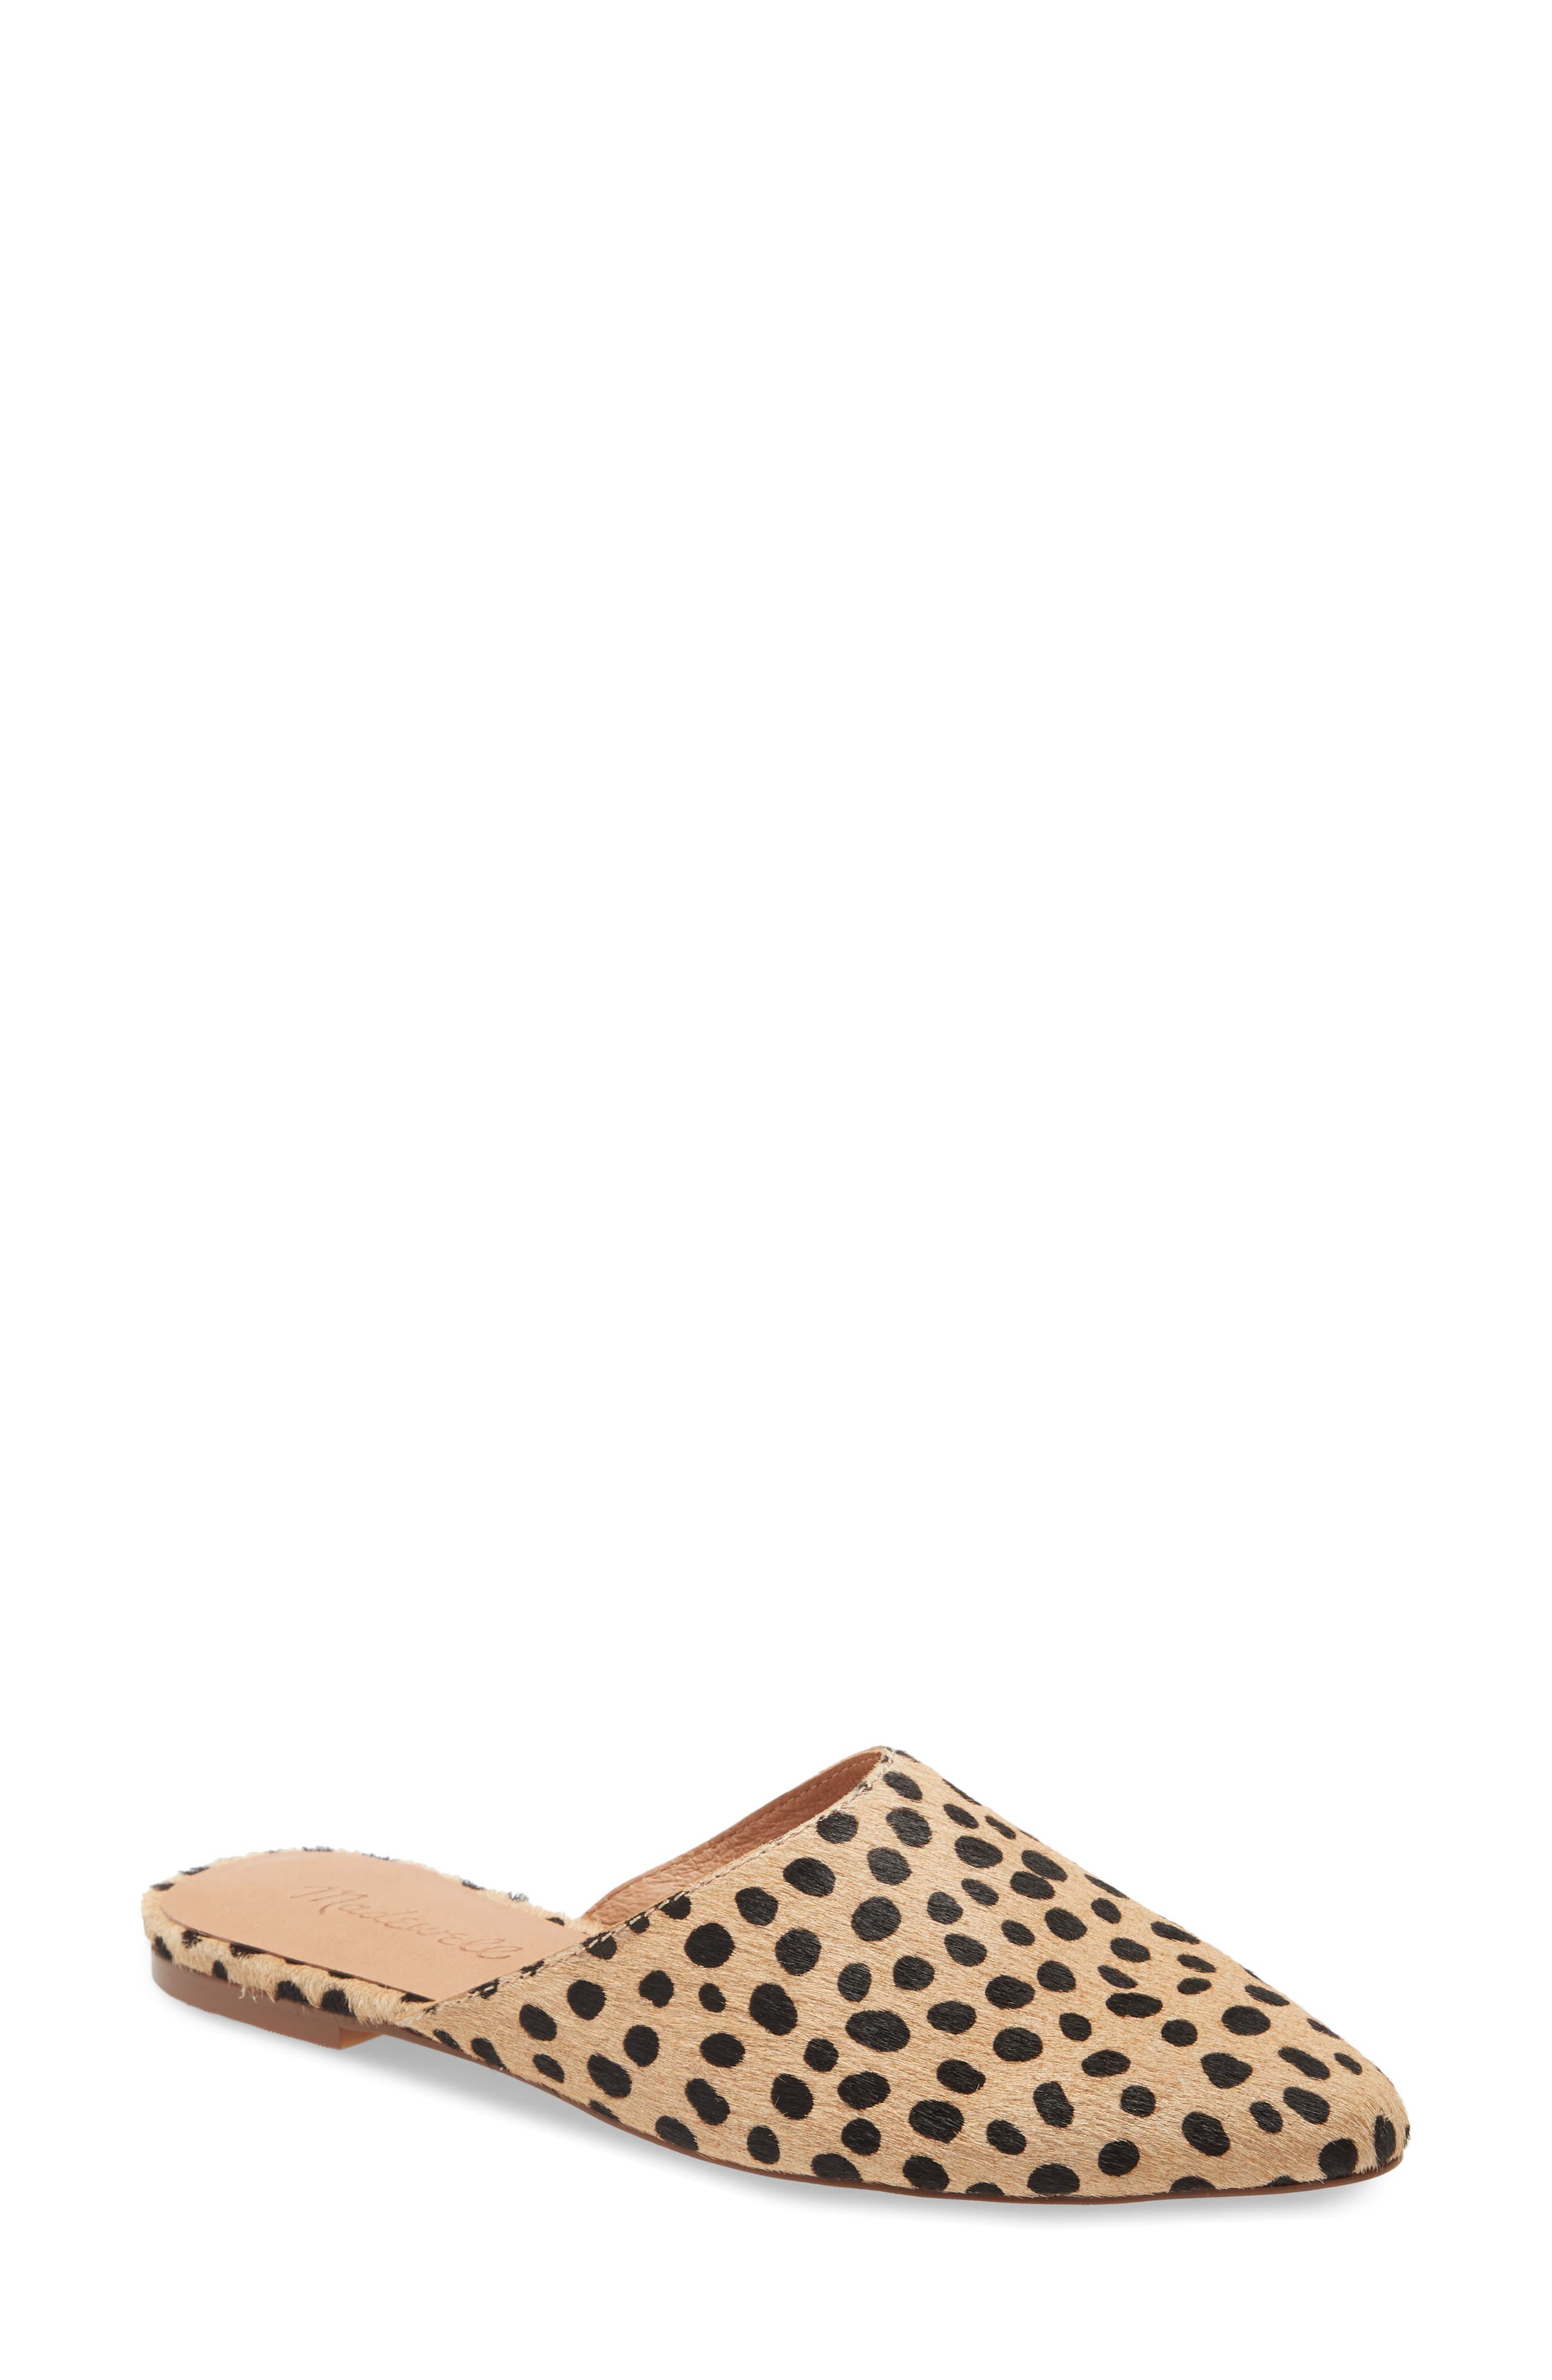 madewell womens shoes